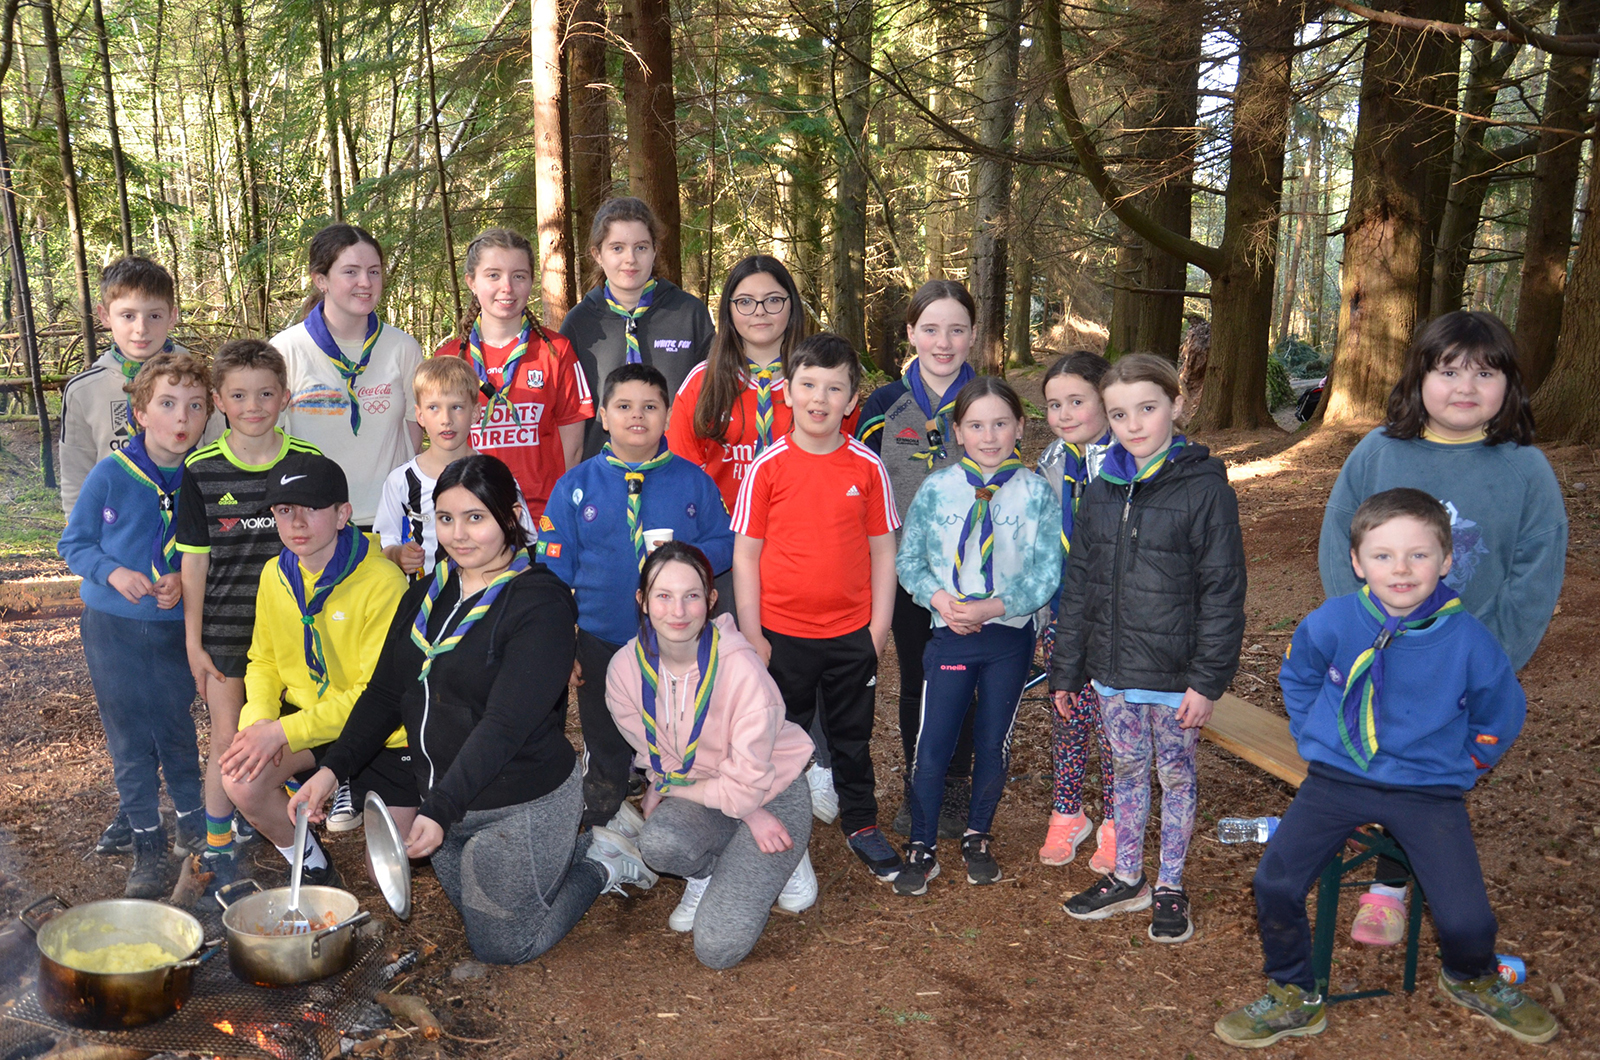 Busy day in the woods for Ballyhooly scouts